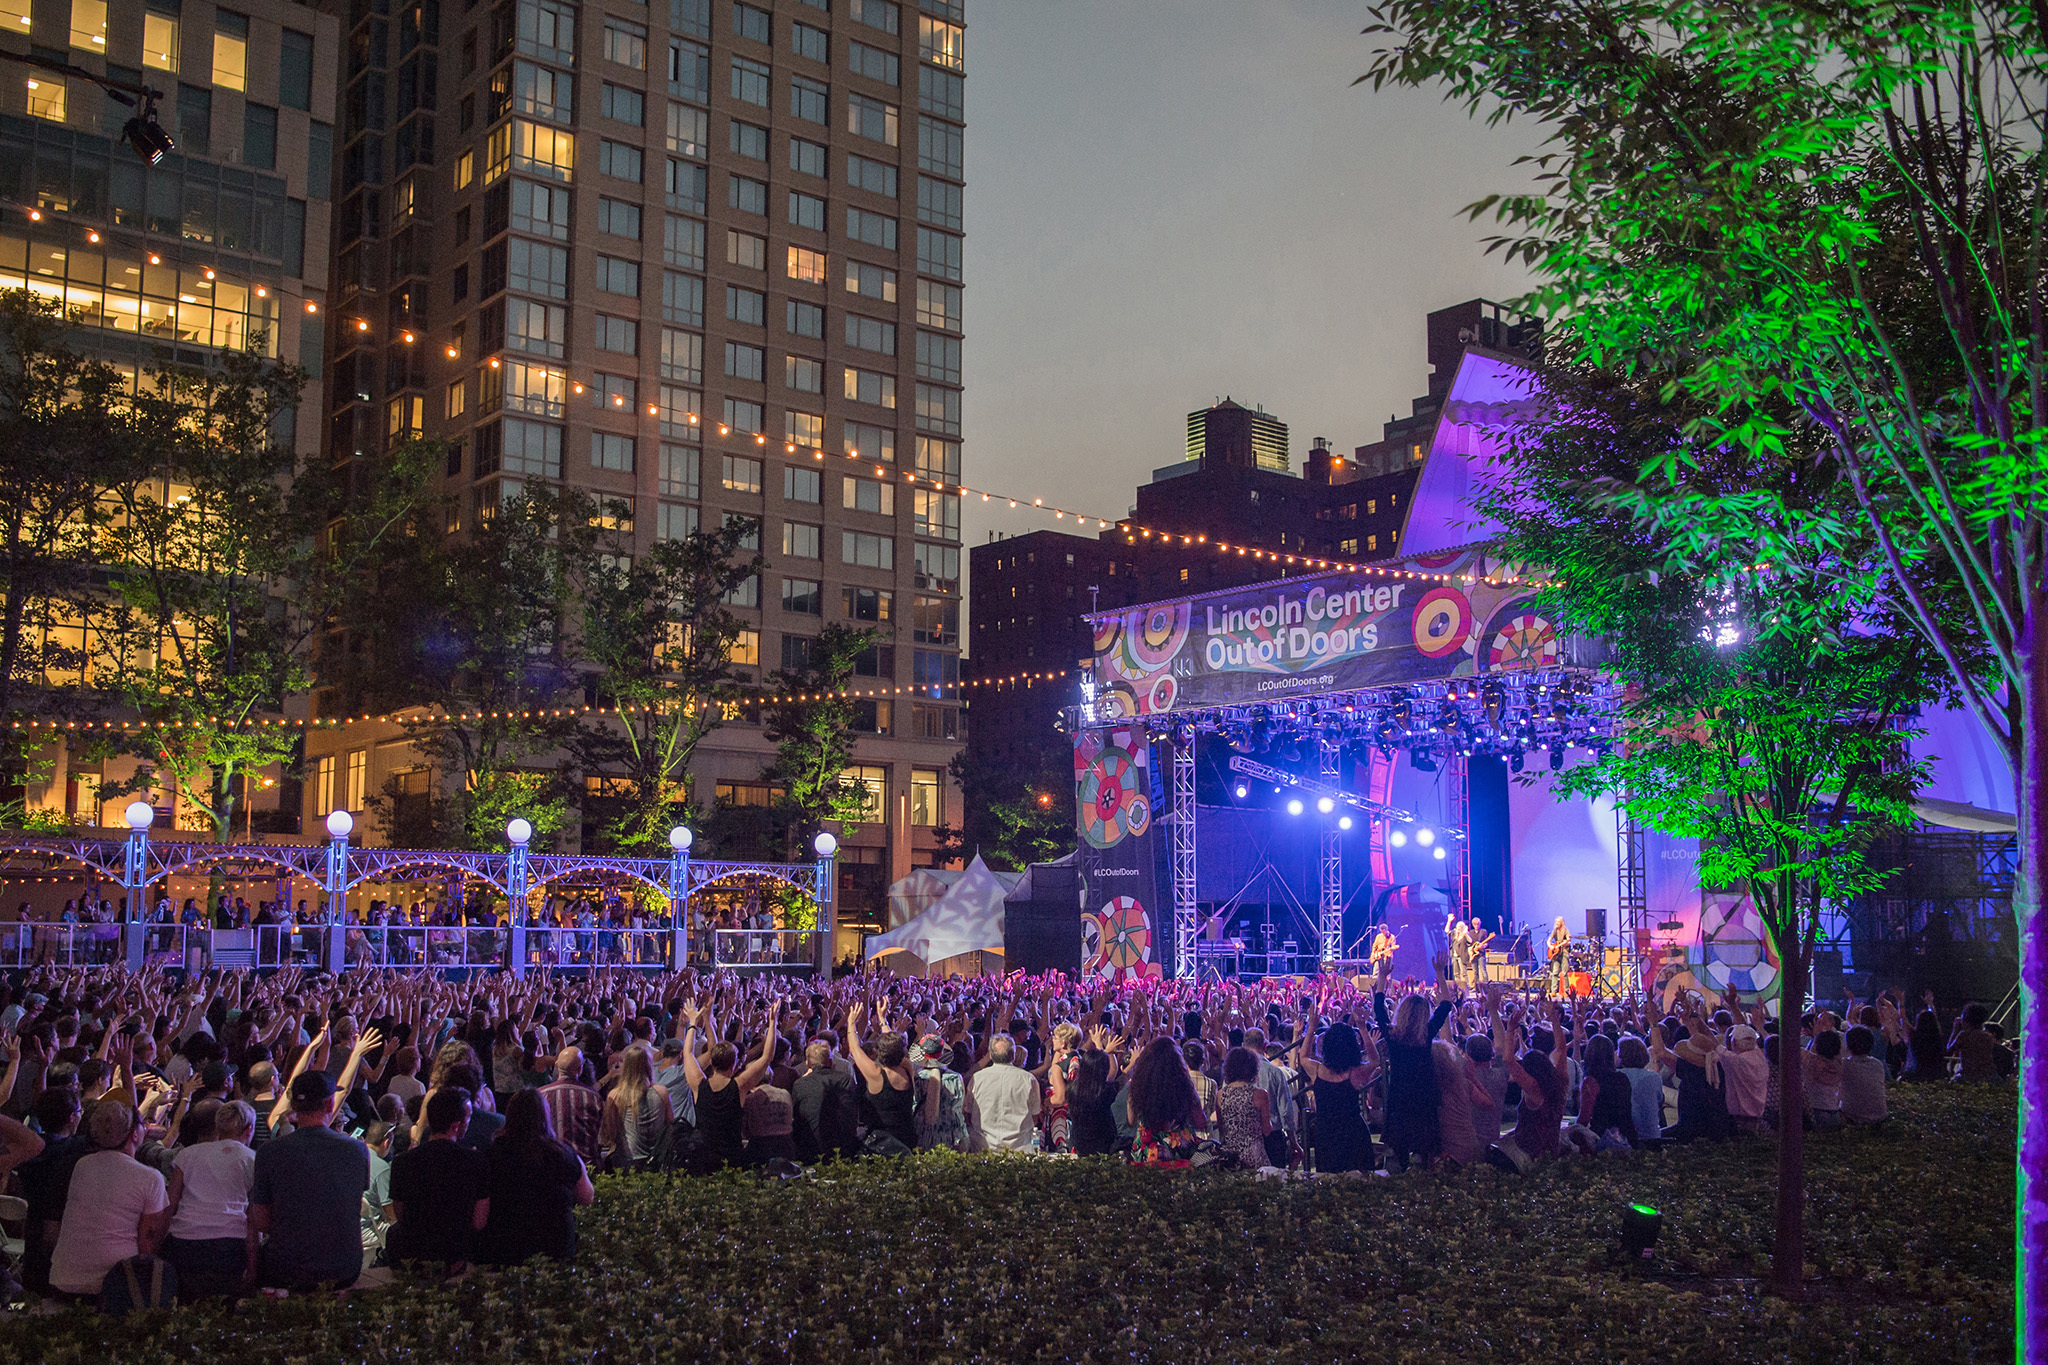 Summer concerts in NYC including free shows and outdoor parties